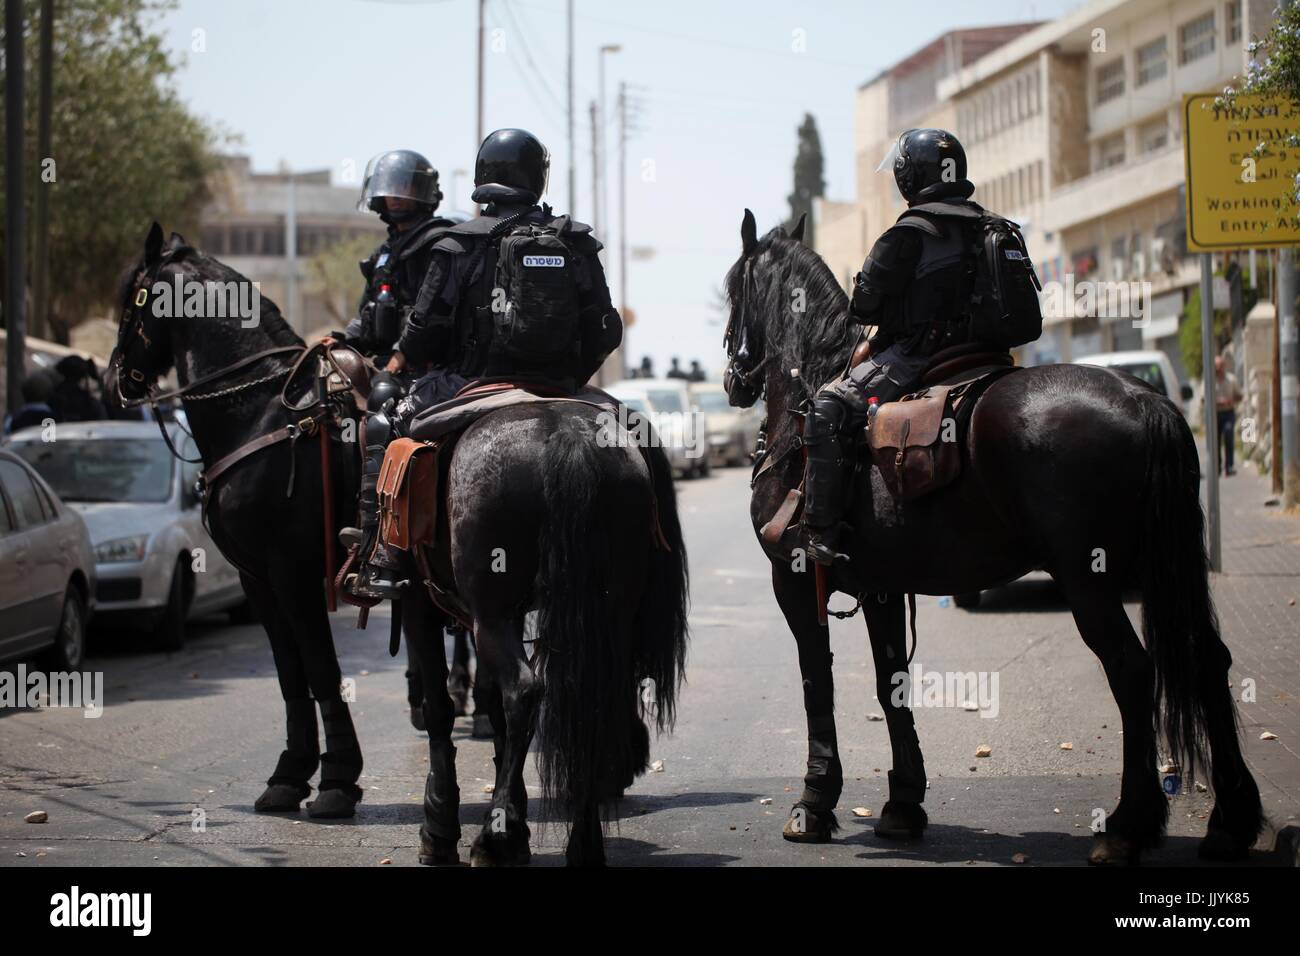 Jerusalem, Jerusalem, Palestinian Territory. 20th Aug, 2017. Horse mounted Israeli security forces patrol during clashes with Palestinian protesters following Friday prayer outside Jerusalem's Old City on July 21, 2017, after Israeli police barred men under 50 from entering the Old City for Friday Muslim prayers as tensions rose and protests erupted over new security measures at the highly sensitive Al-Aqsa mosque compound. The ban came after Israeli ministers decided not to order the removal of metal detectors erected at entrances to the Al-Aqsa mosque compound, known to Jews as the Temple Stock Photo